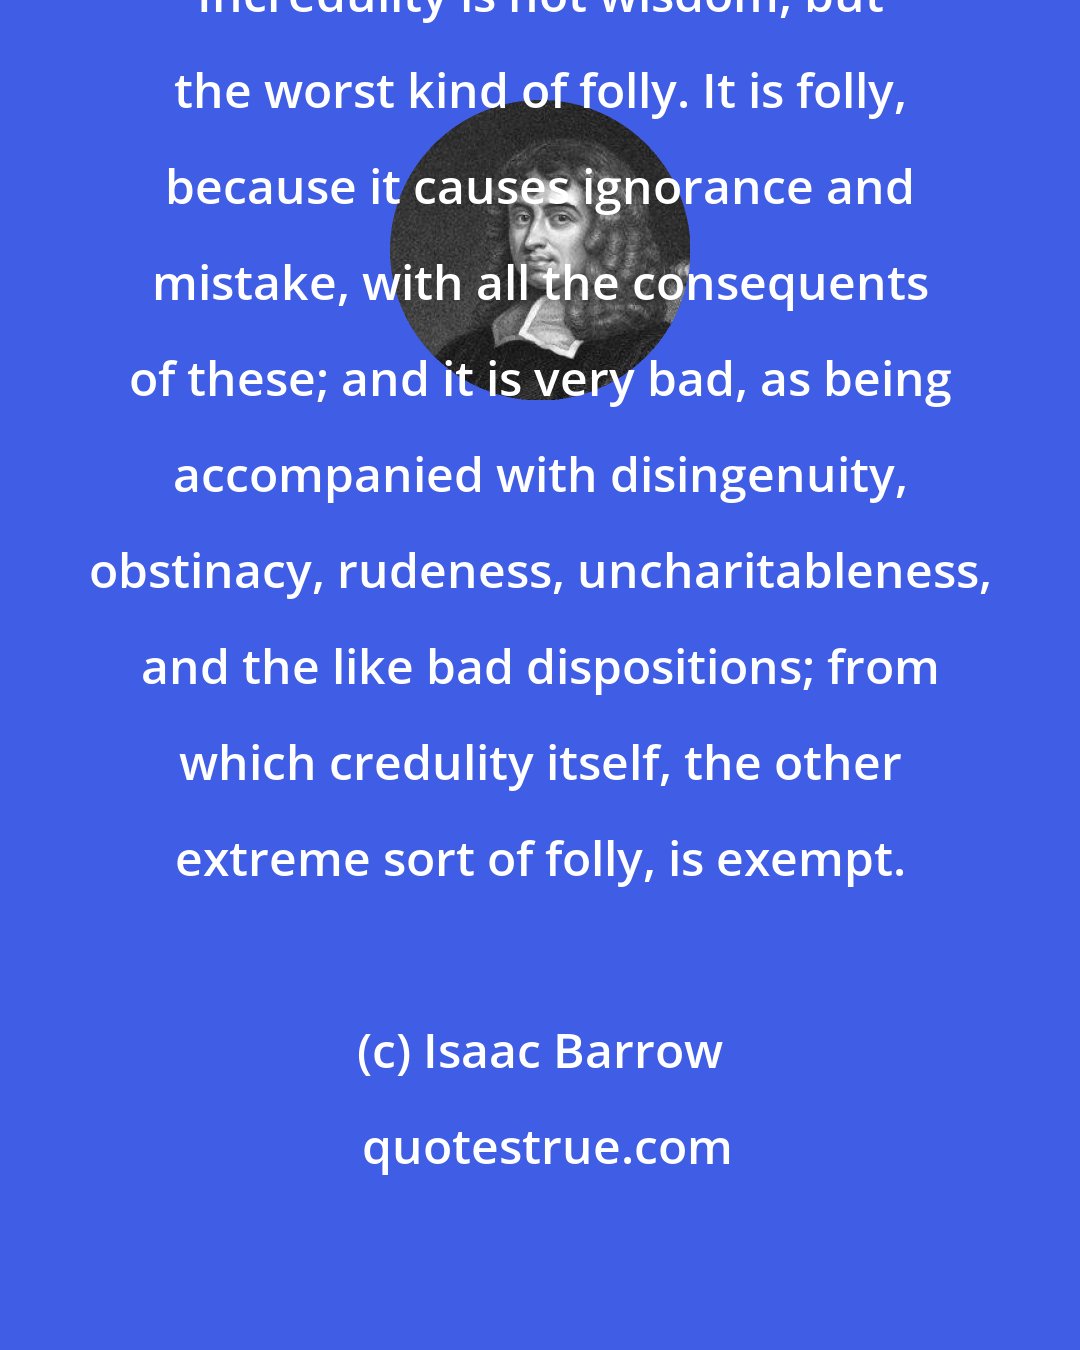 Isaac Barrow: Incredulity is not wisdom, but the worst kind of folly. It is folly, because it causes ignorance and mistake, with all the consequents of these; and it is very bad, as being accompanied with disingenuity, obstinacy, rudeness, uncharitableness, and the like bad dispositions; from which credulity itself, the other extreme sort of folly, is exempt.